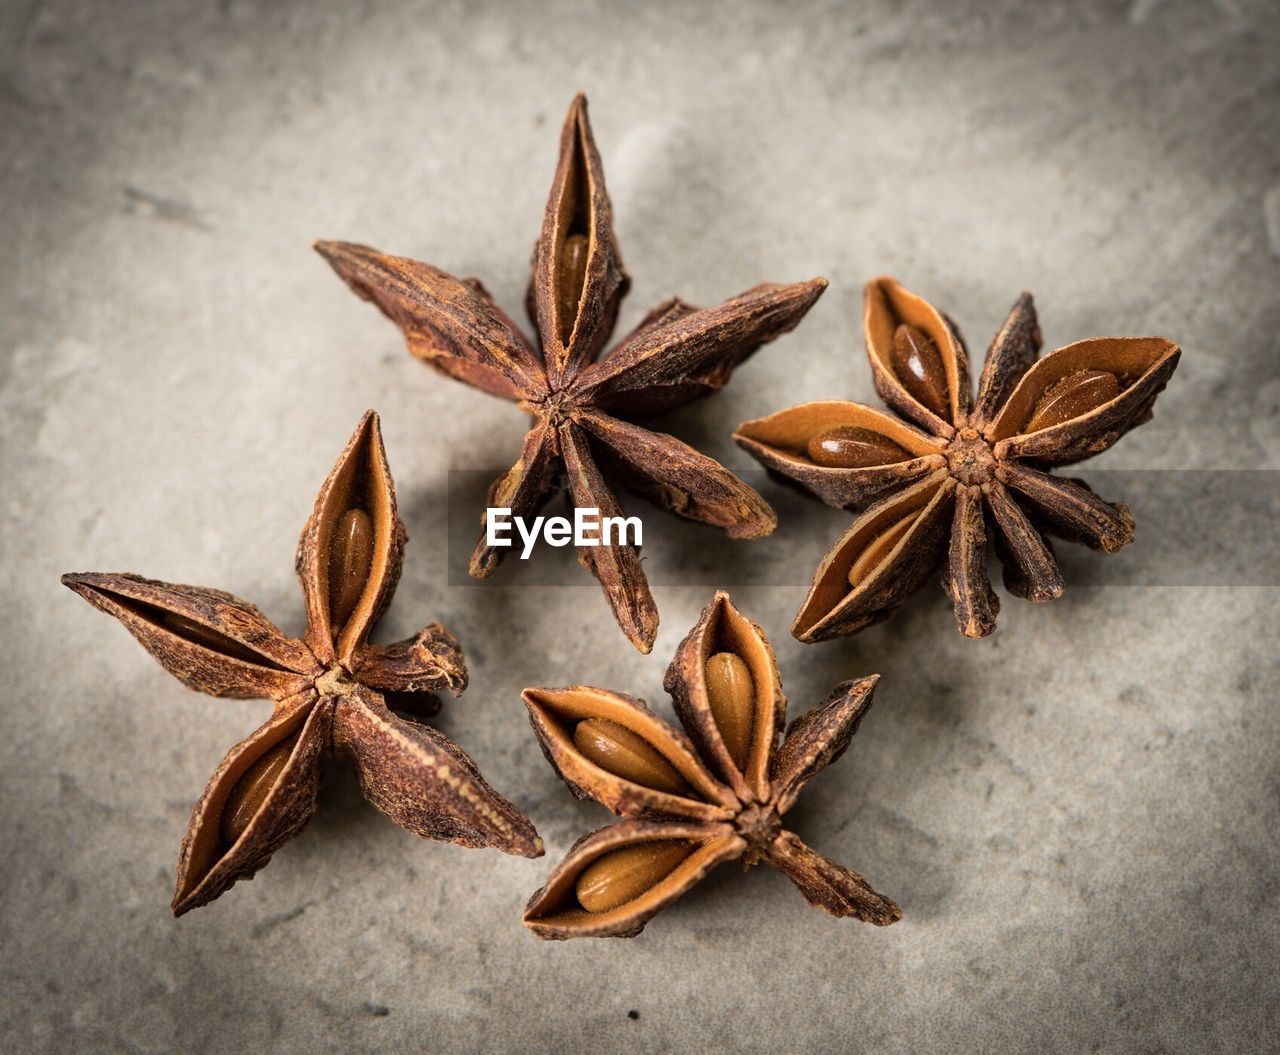 Close-up of star anise on table